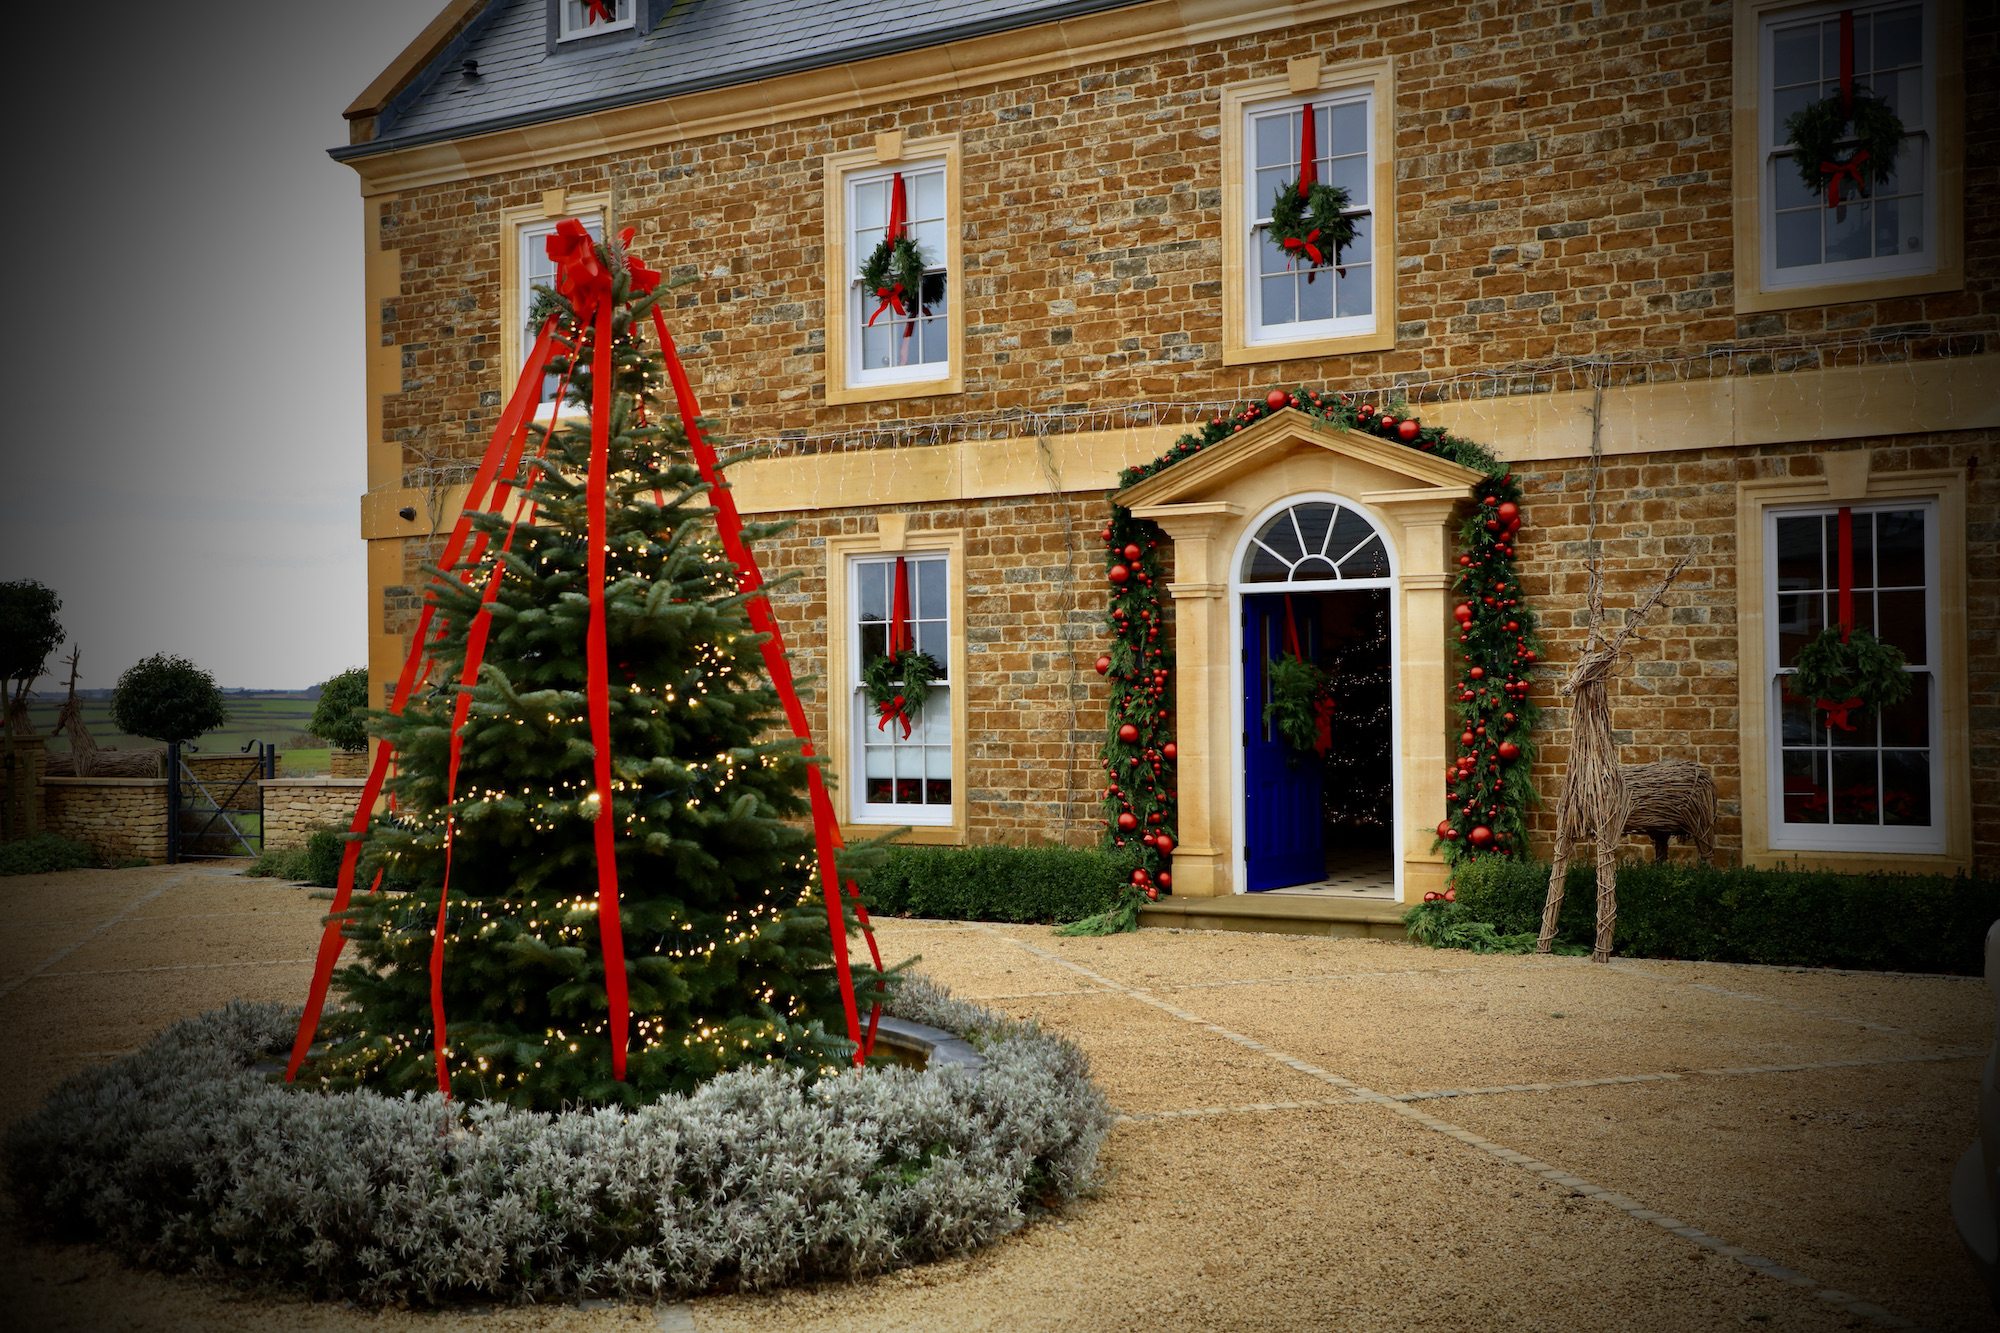 Georgian manor house courtyard decorated for Christmas with velvet red bows